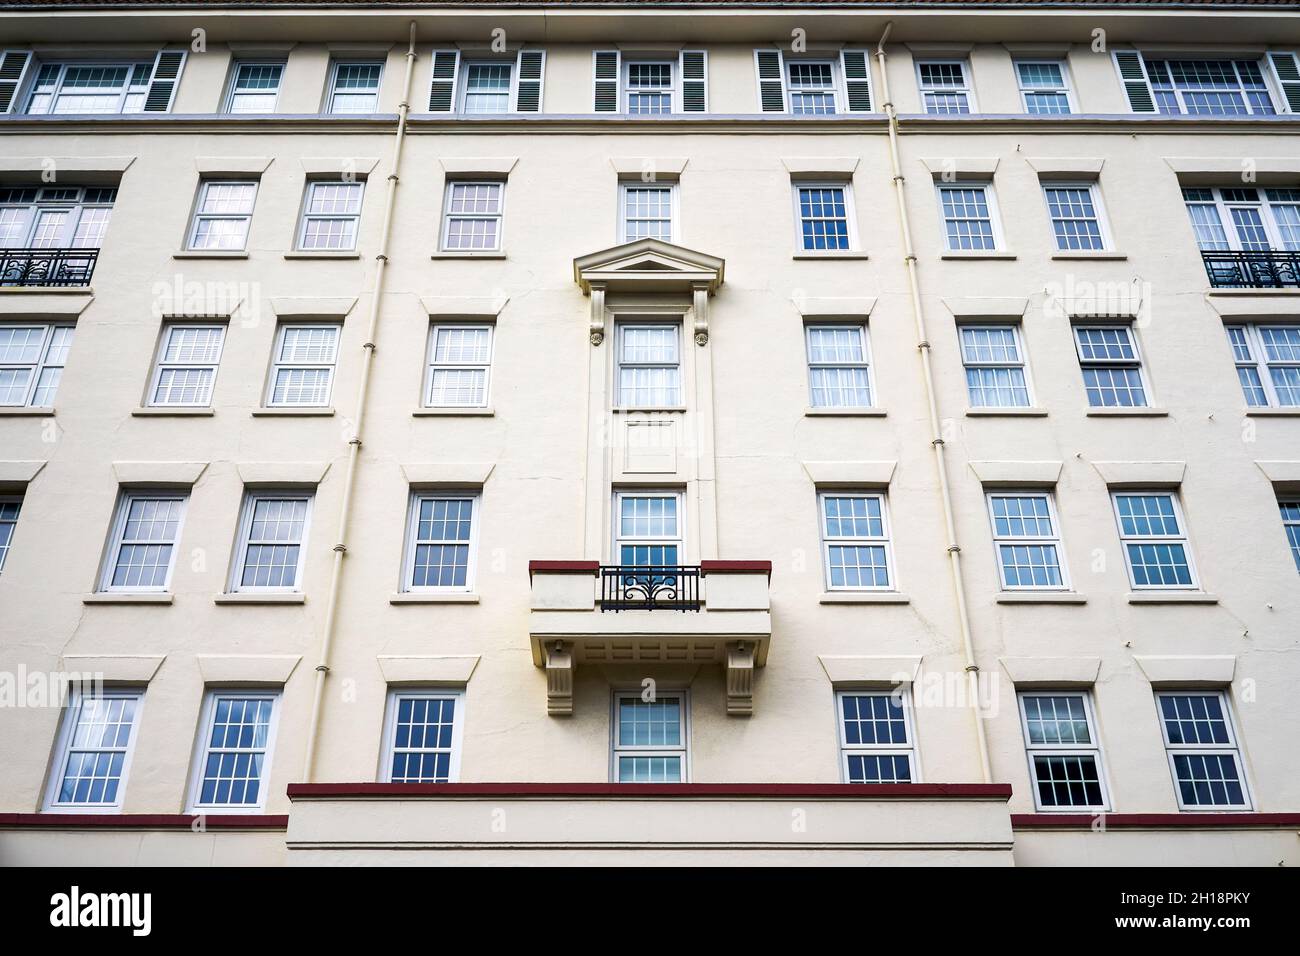 Grand apartment building with multiple windows and single balcony Stock Photo